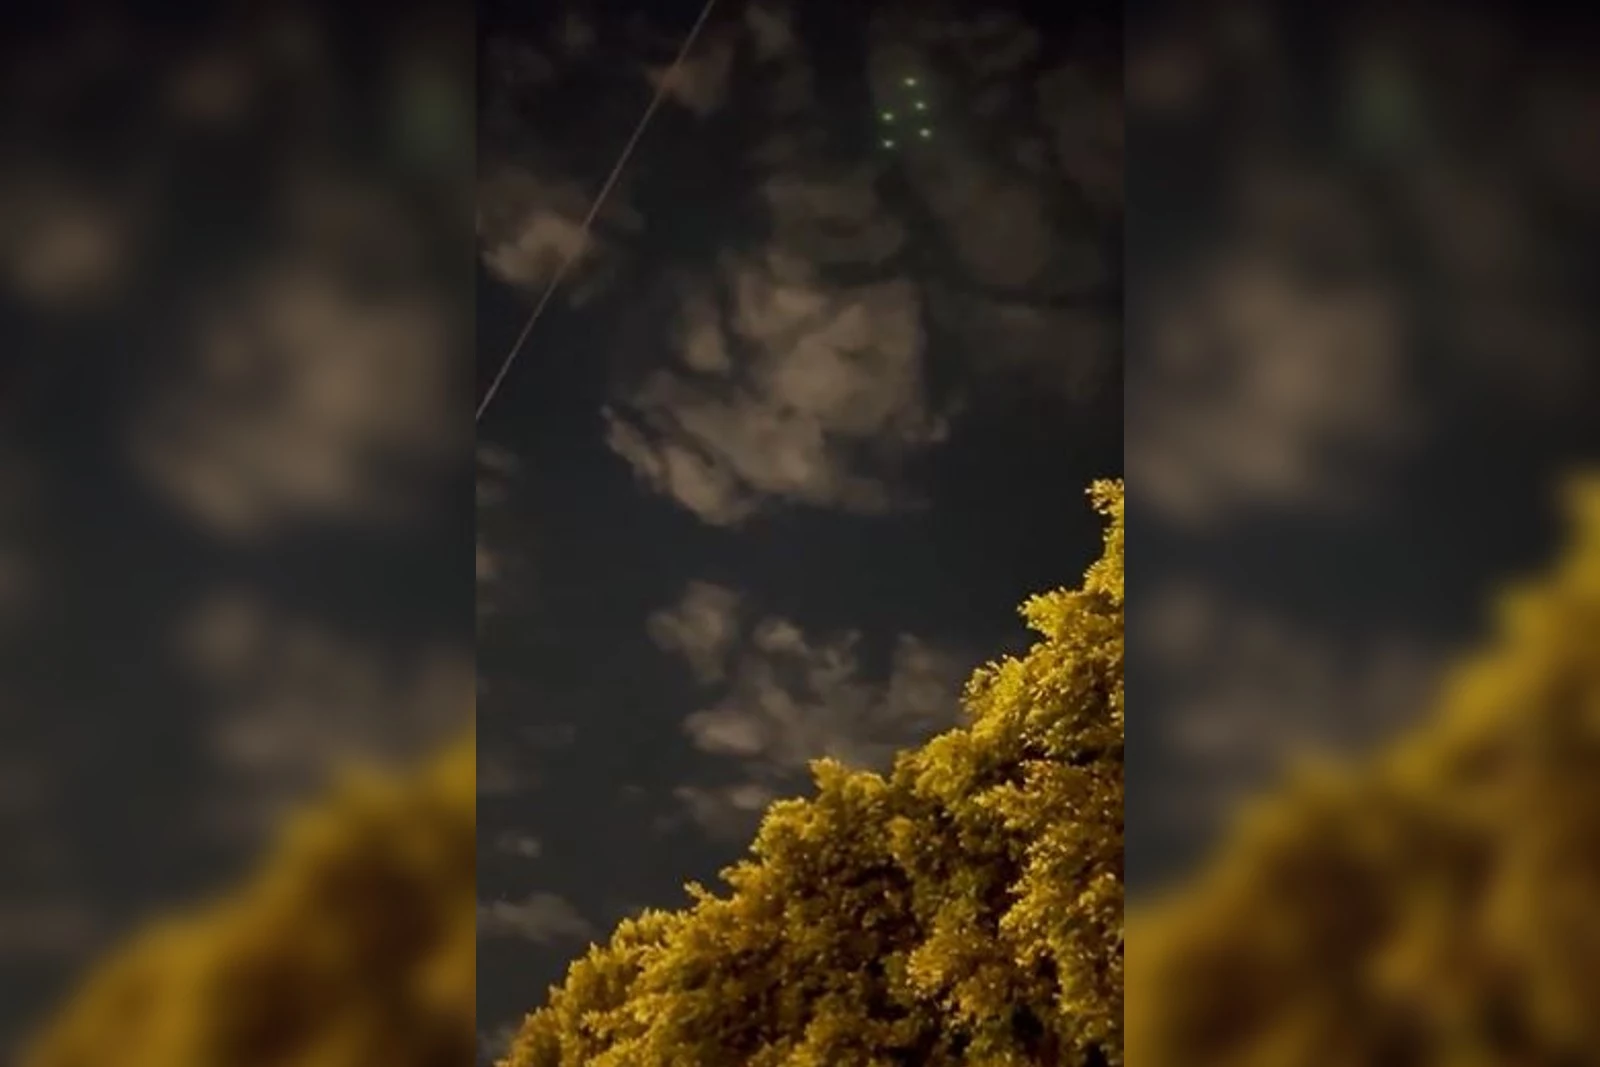 Video of Mysterious Lights in the Sky Over Central Texas pic